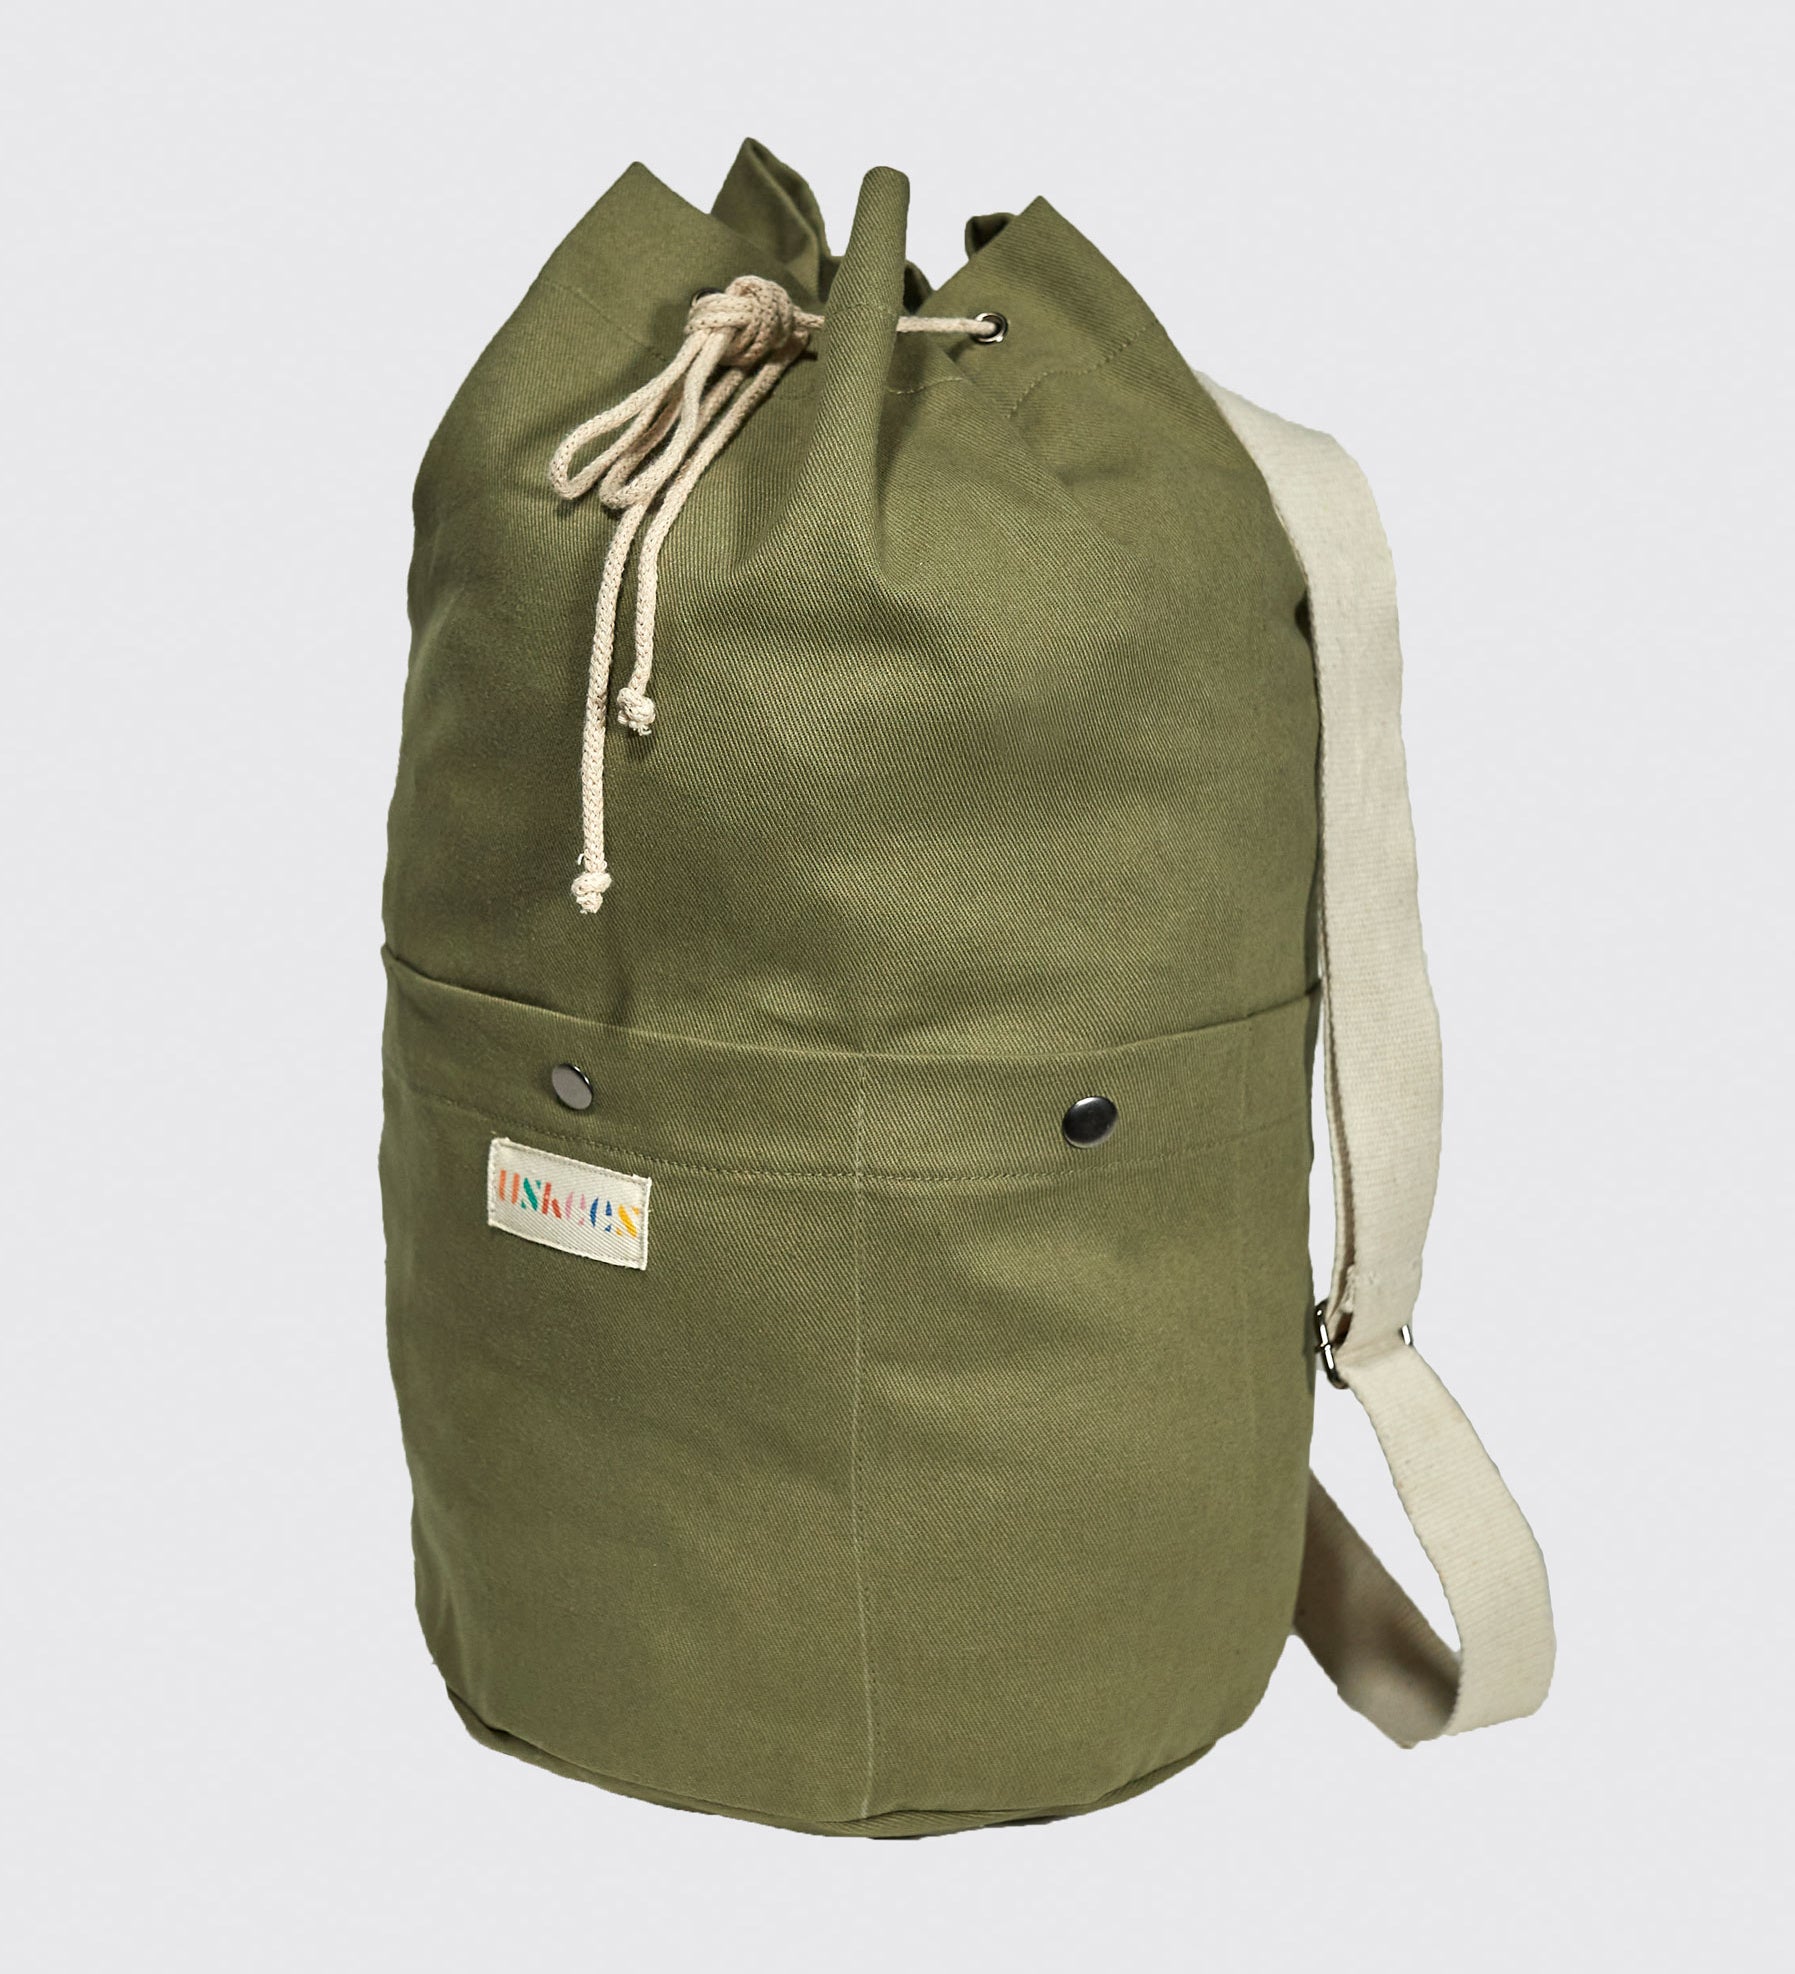 Full-length upright view of Uskees #0402 bucket bag, clearly showing the drawstring top, cylindrical shape and marsh green canvas.